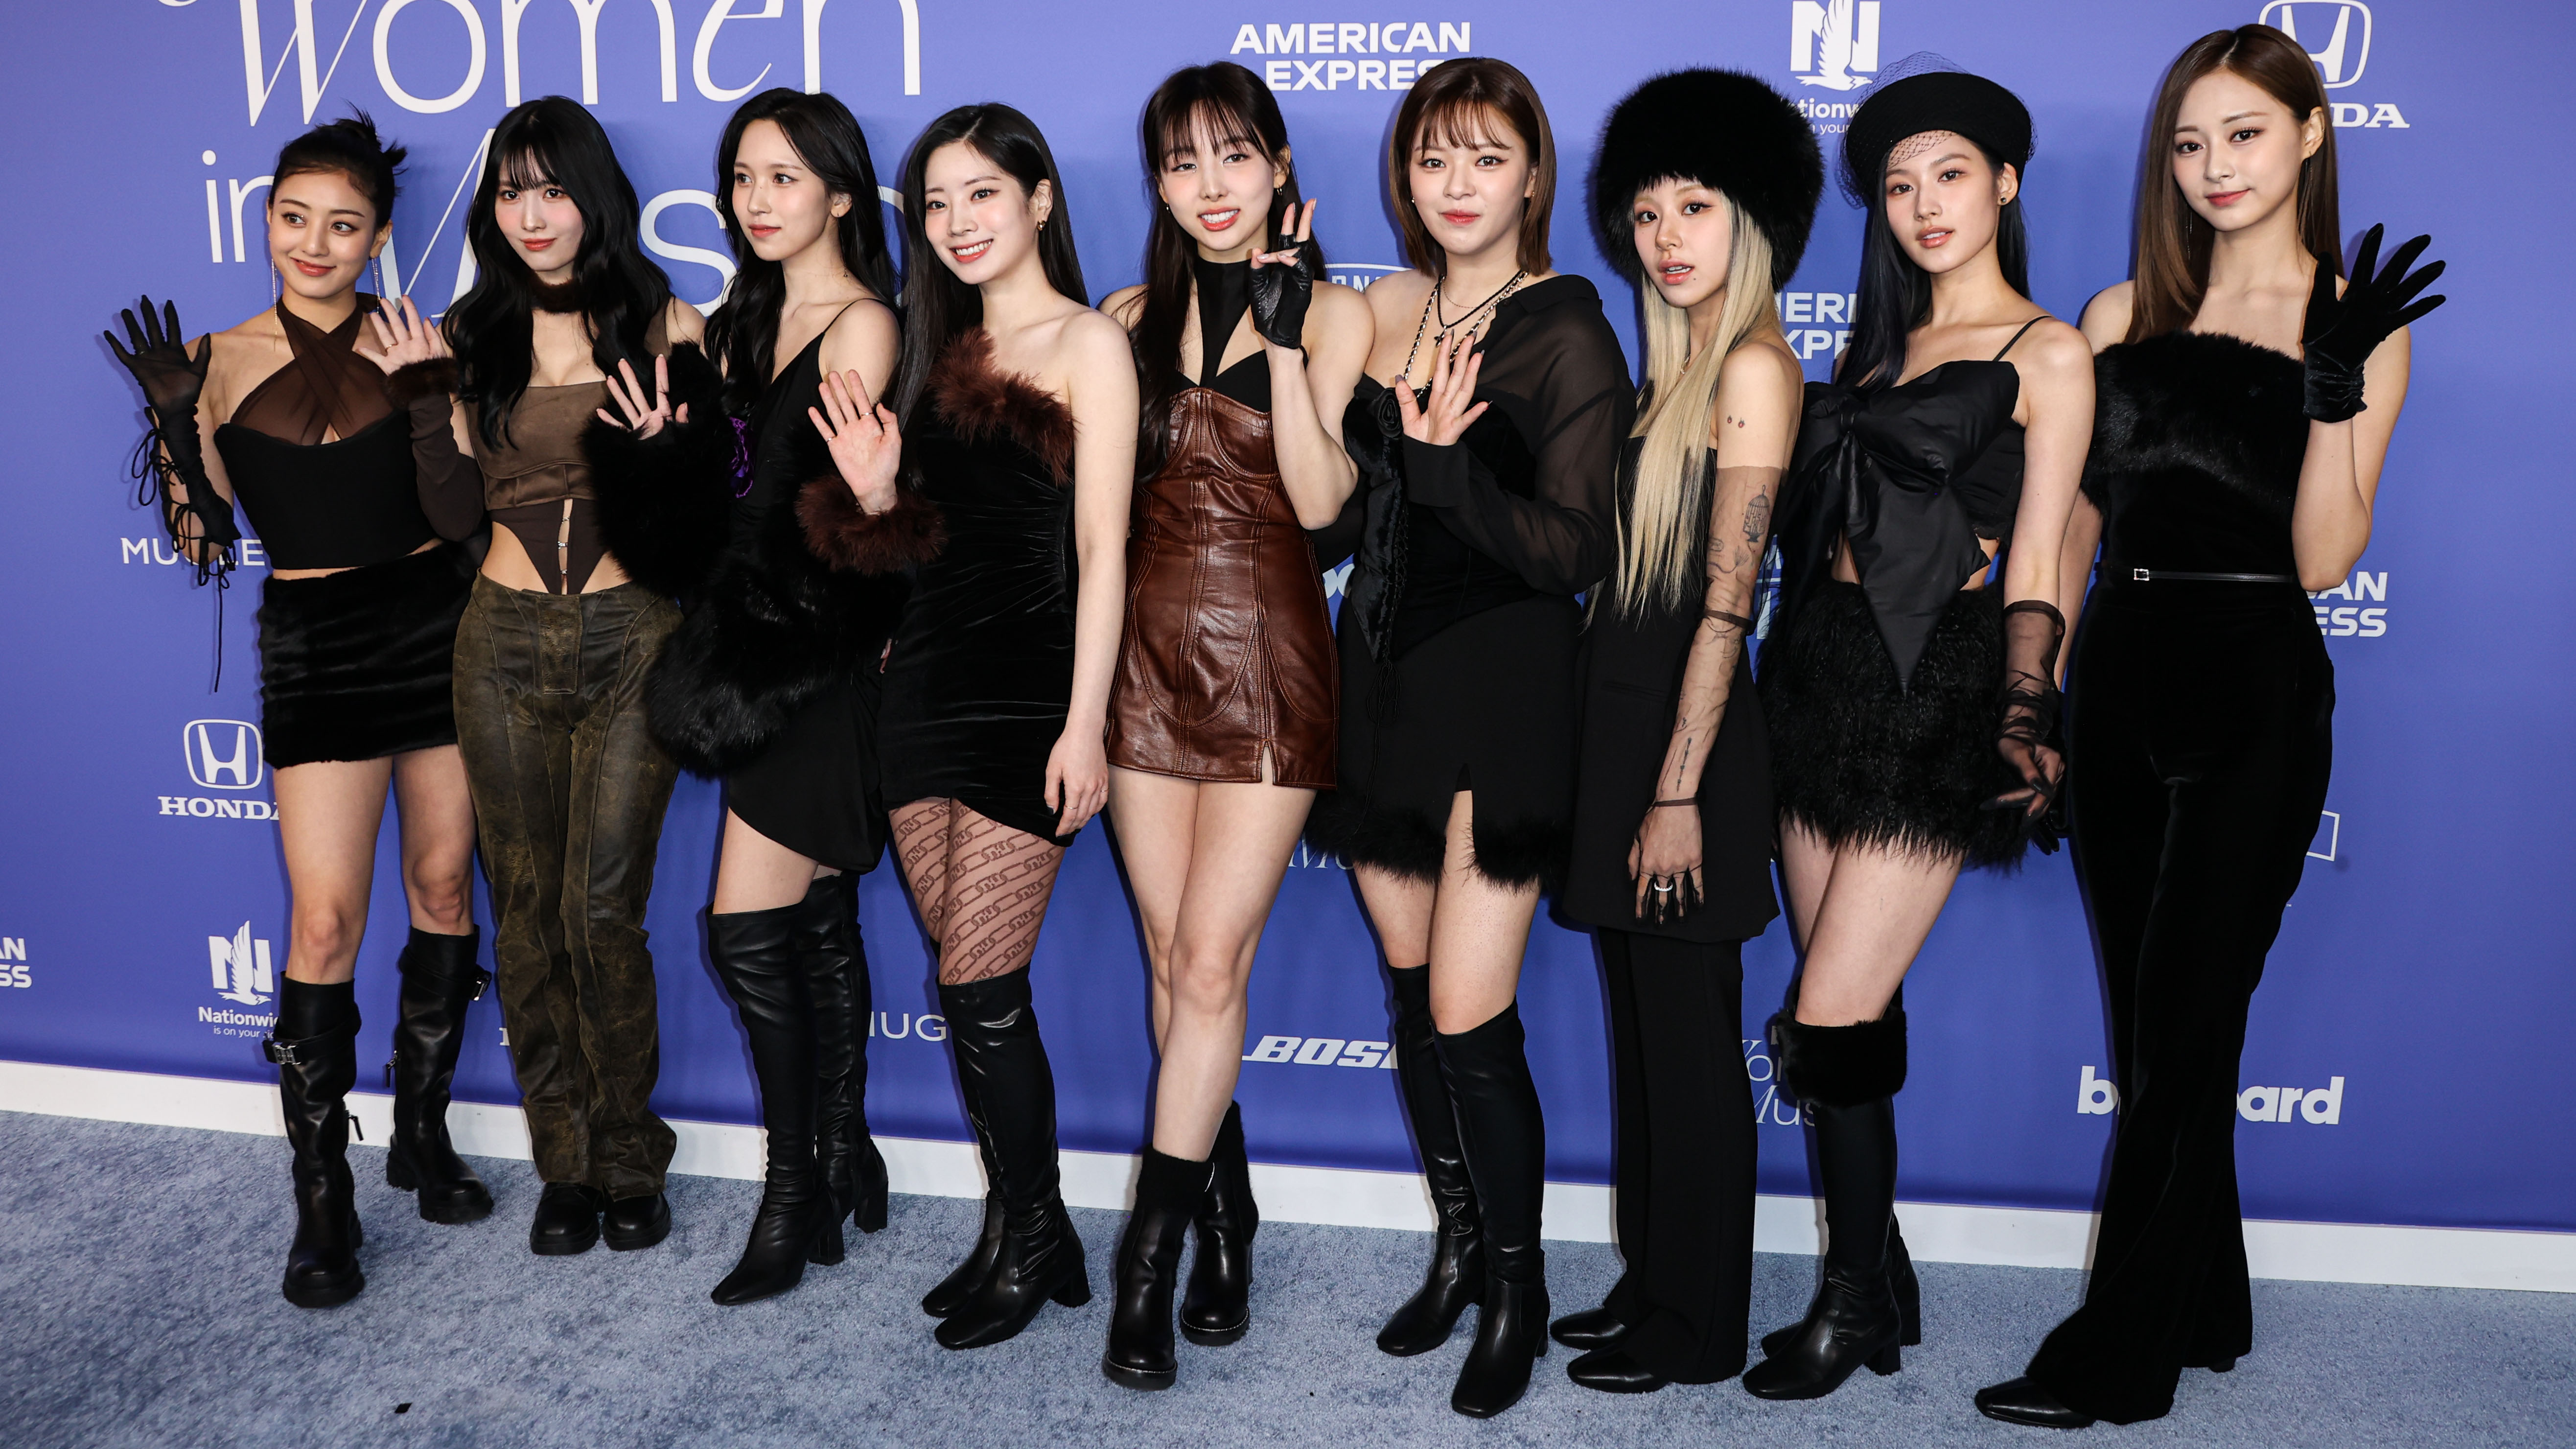 K-pop releases in January 2023: Twice's new single, mini-album by GOT the  Beat and more to come from a host of girl groups and solo acts